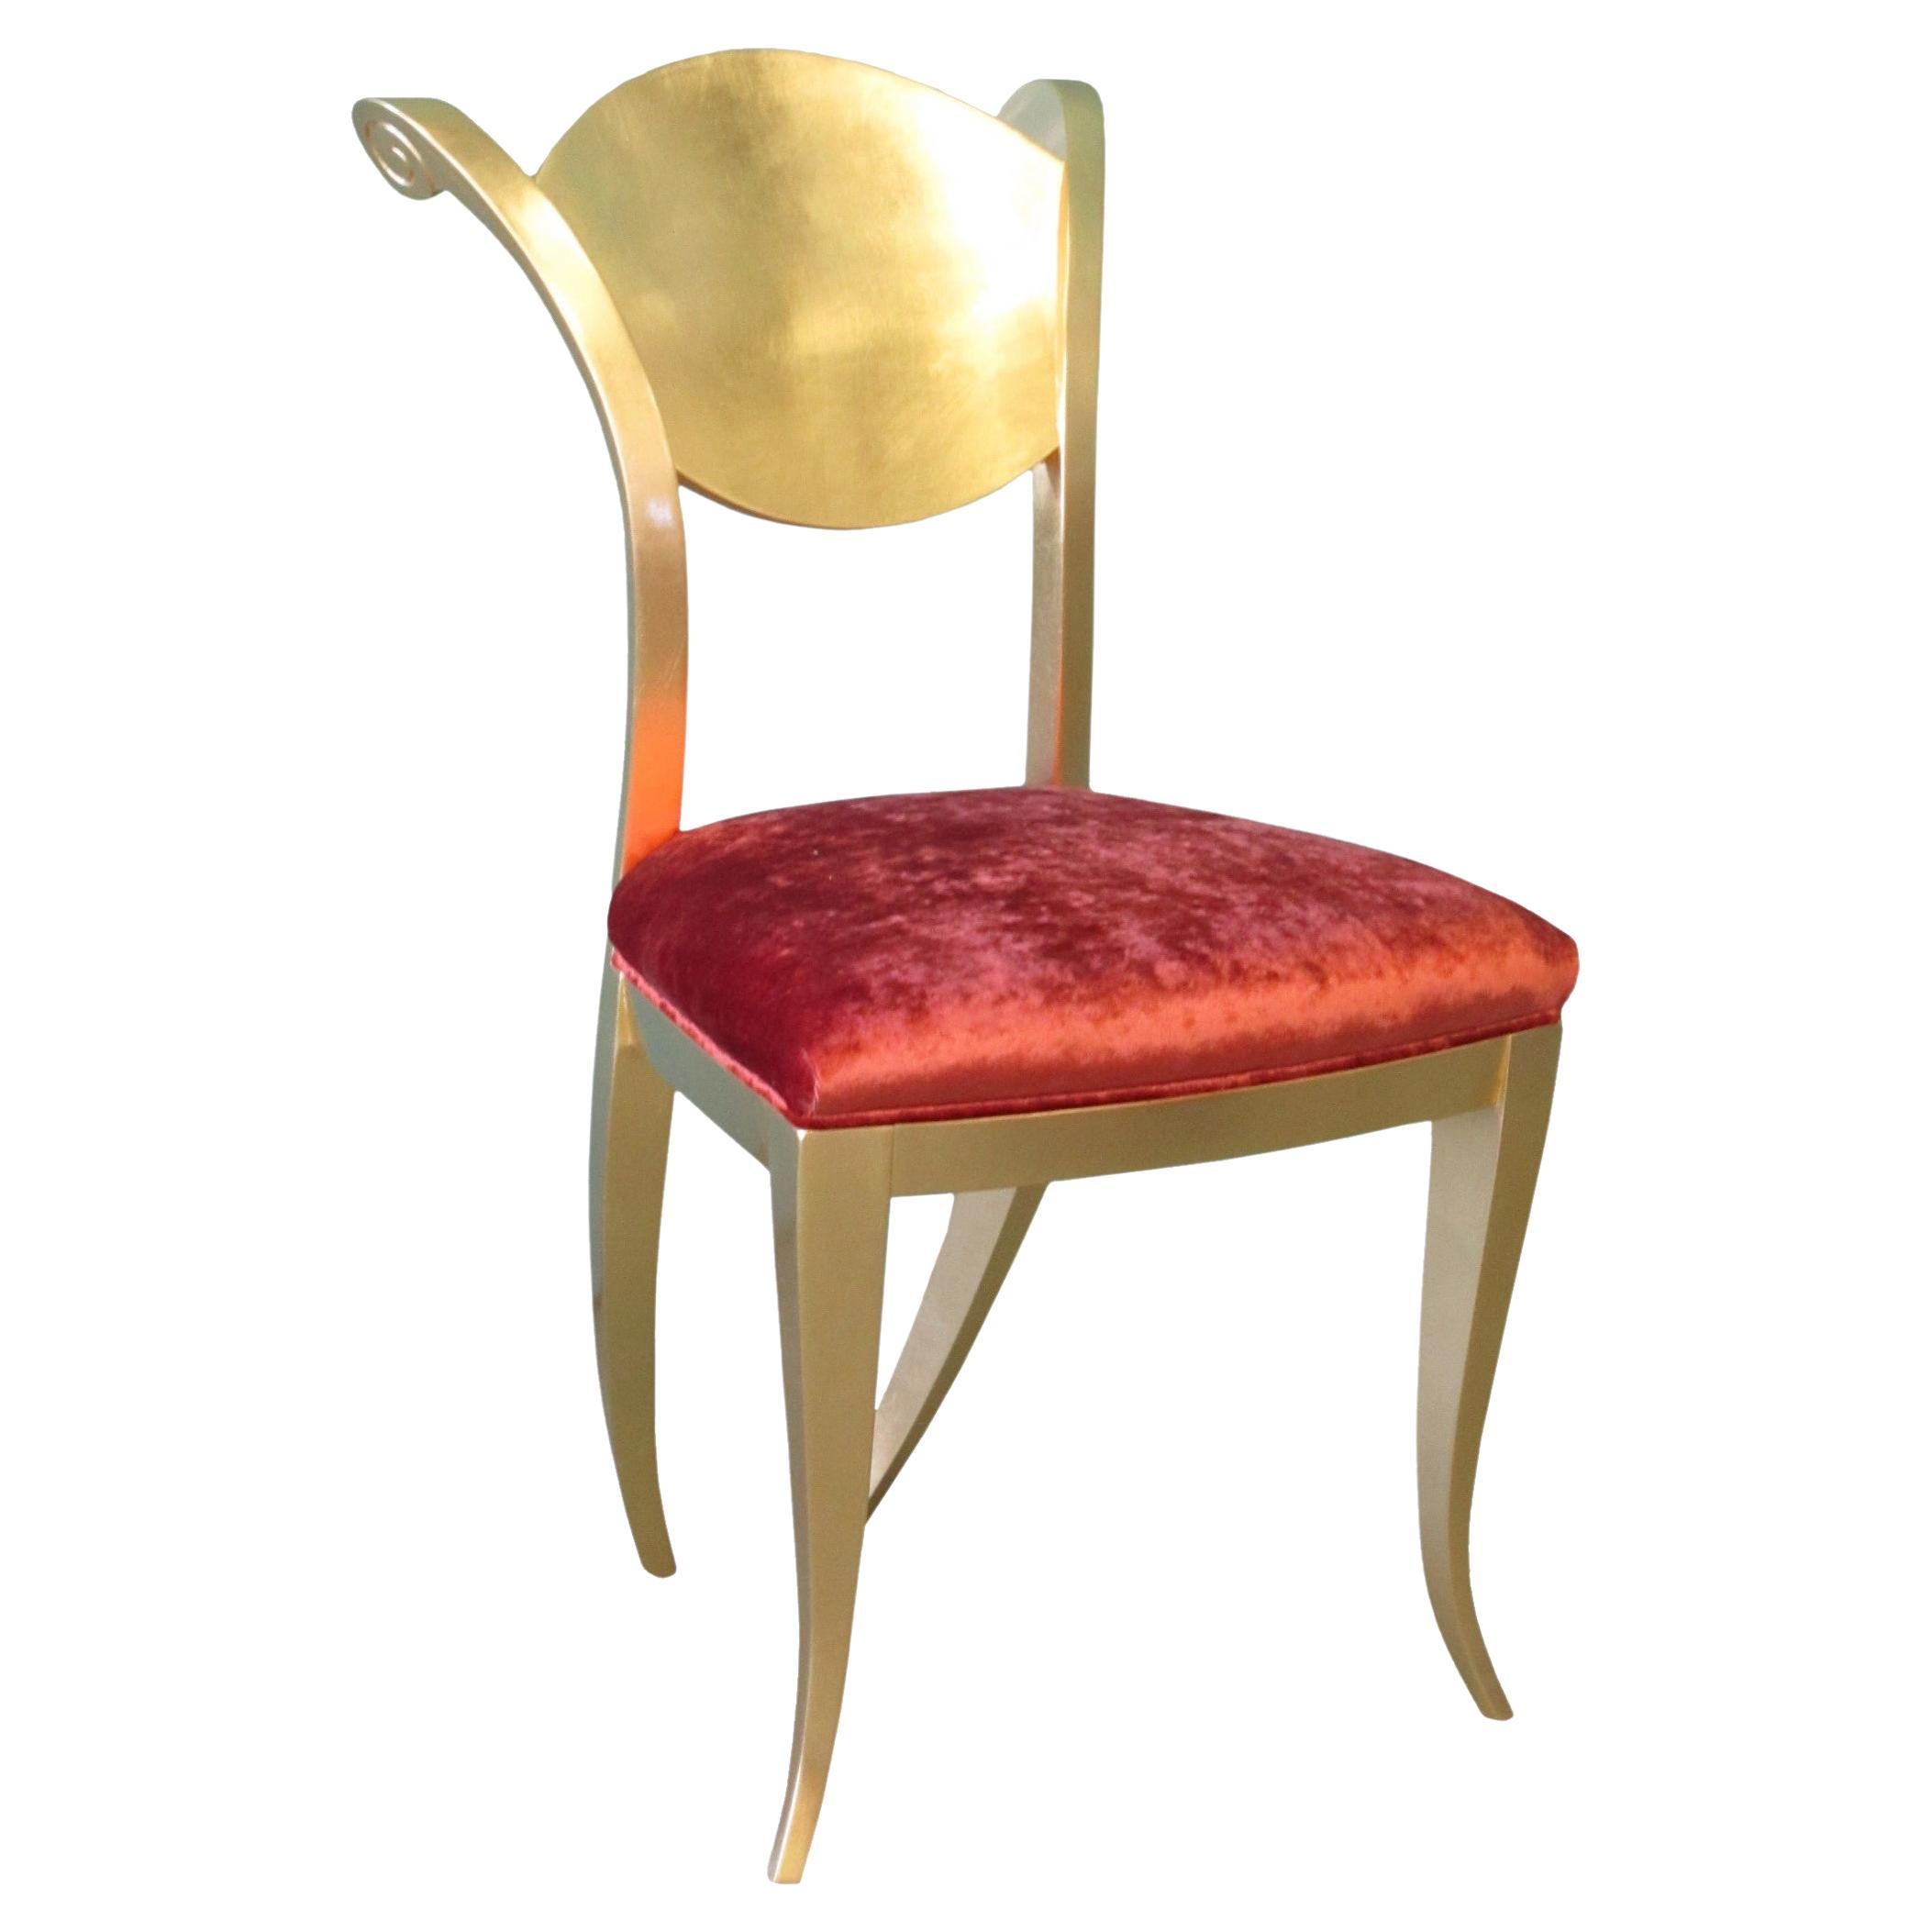 Angel's chair in Solid Wood Gold Leaf Finish and Padded Seat For Sale